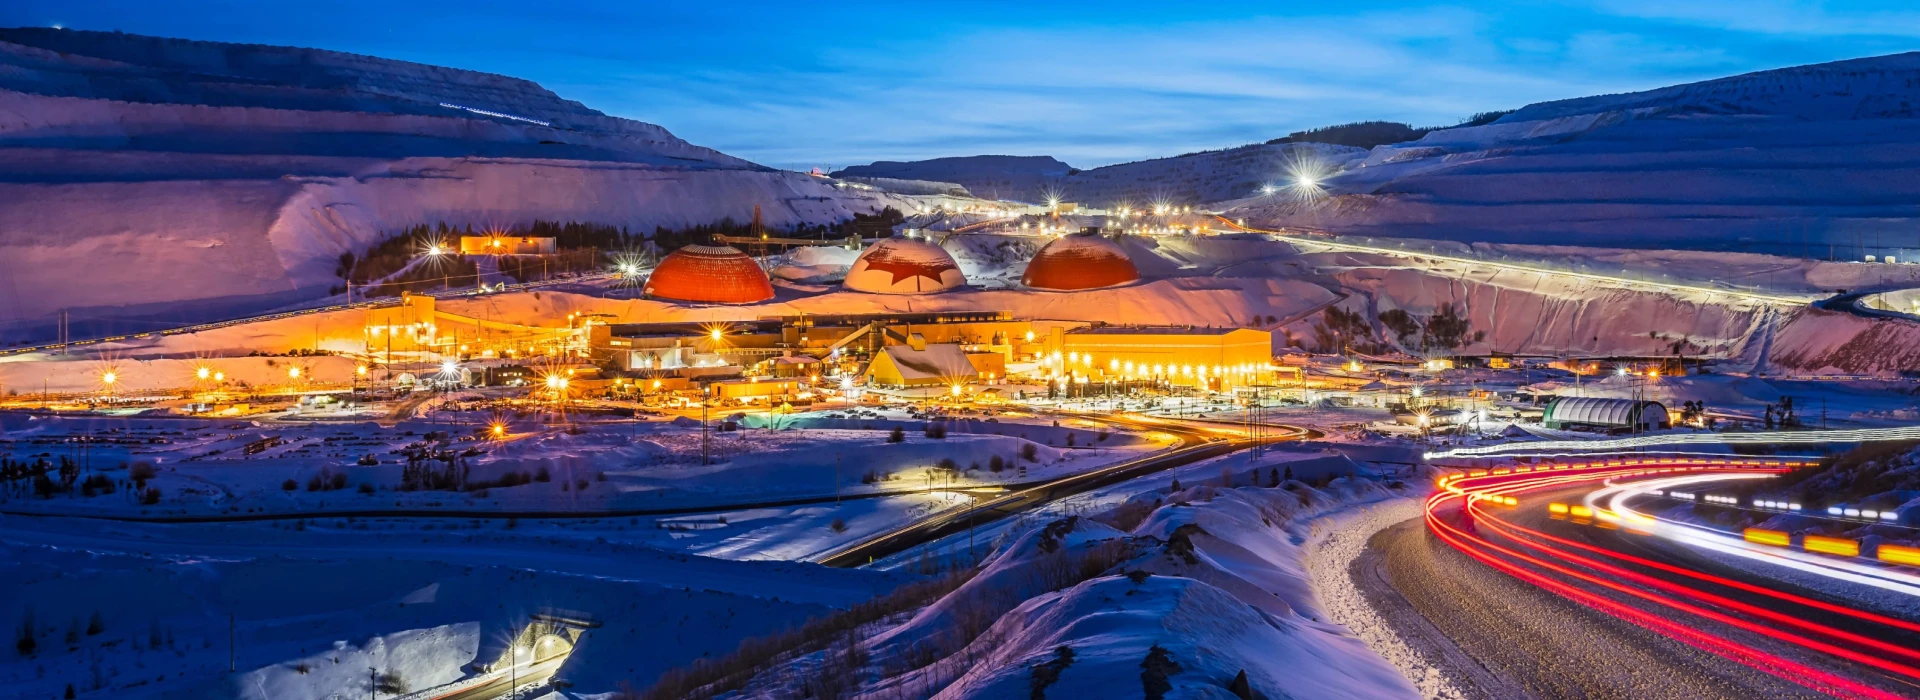 Illuminated mining facility at dusk surrounded by snowy landscape with trails of light from passing cars.